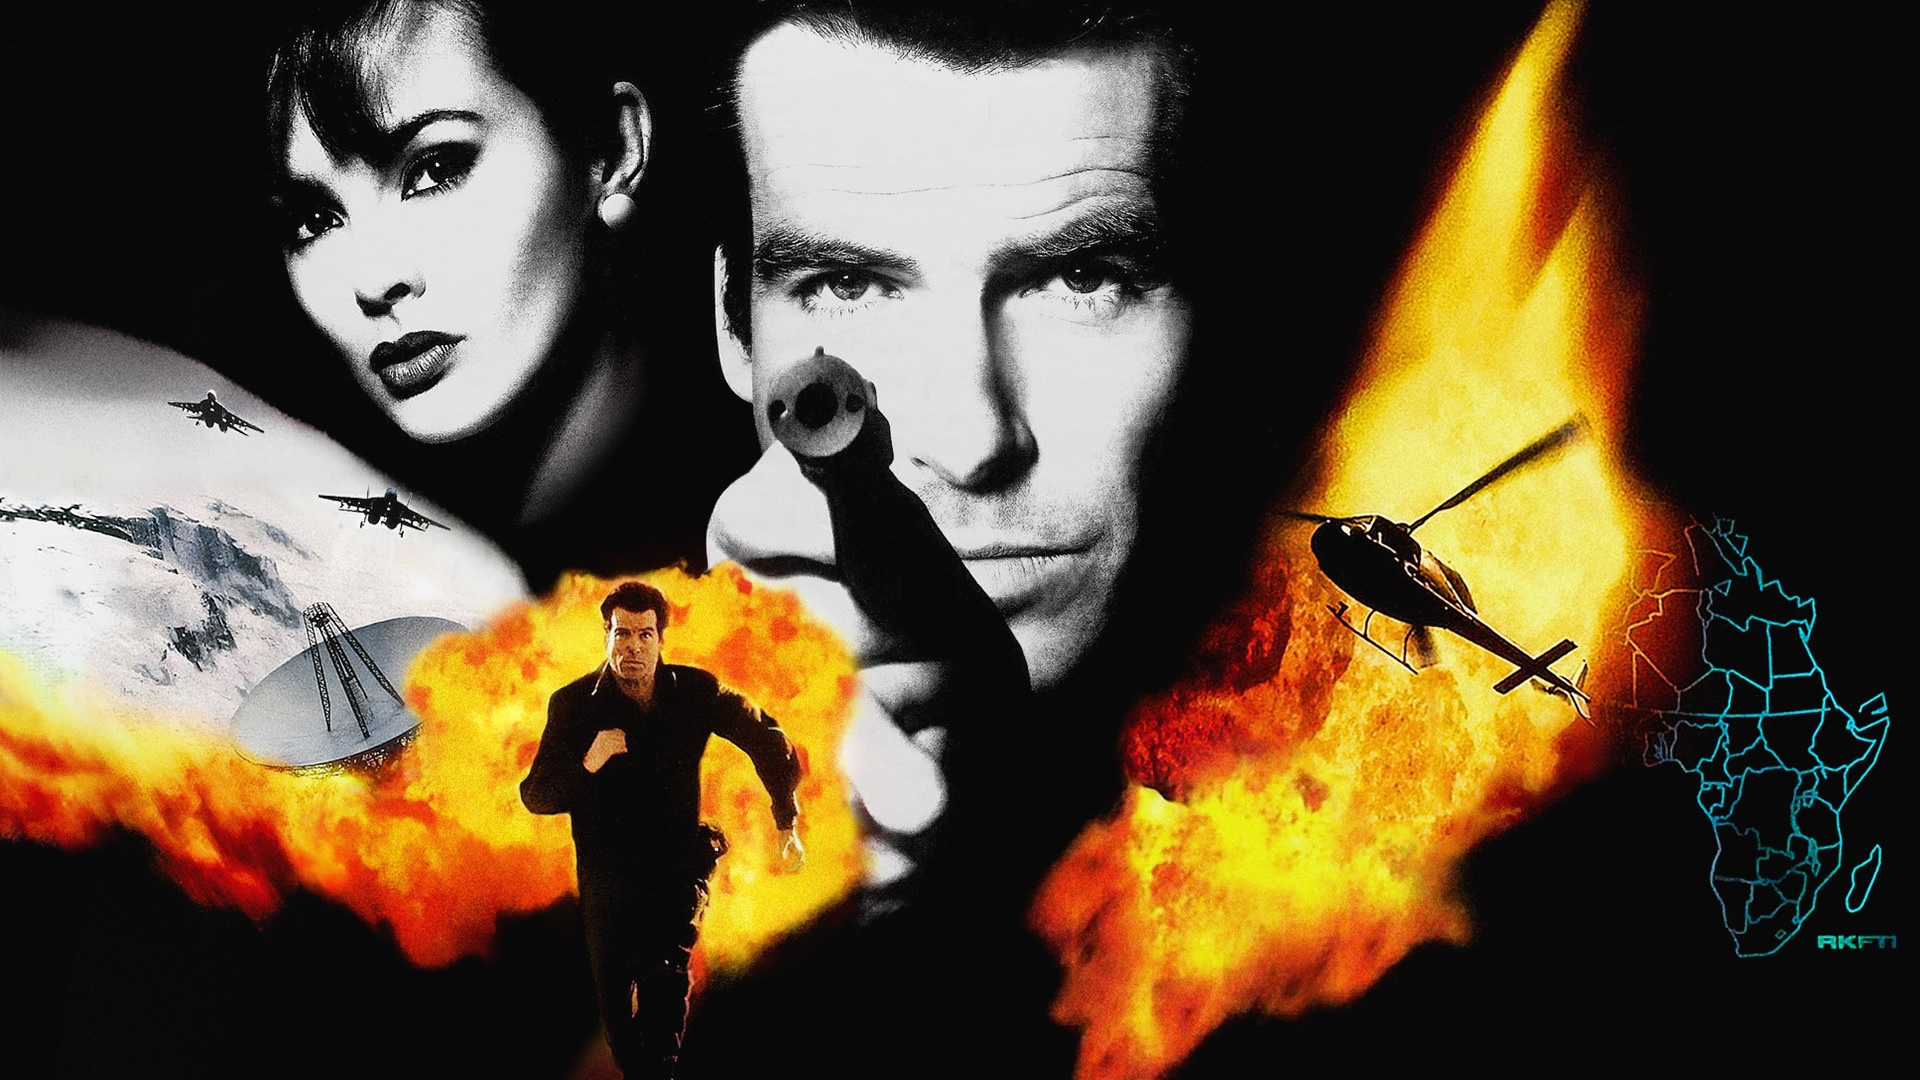 Goldeneye 007 Switch Update Brings Changes but Issues Remain